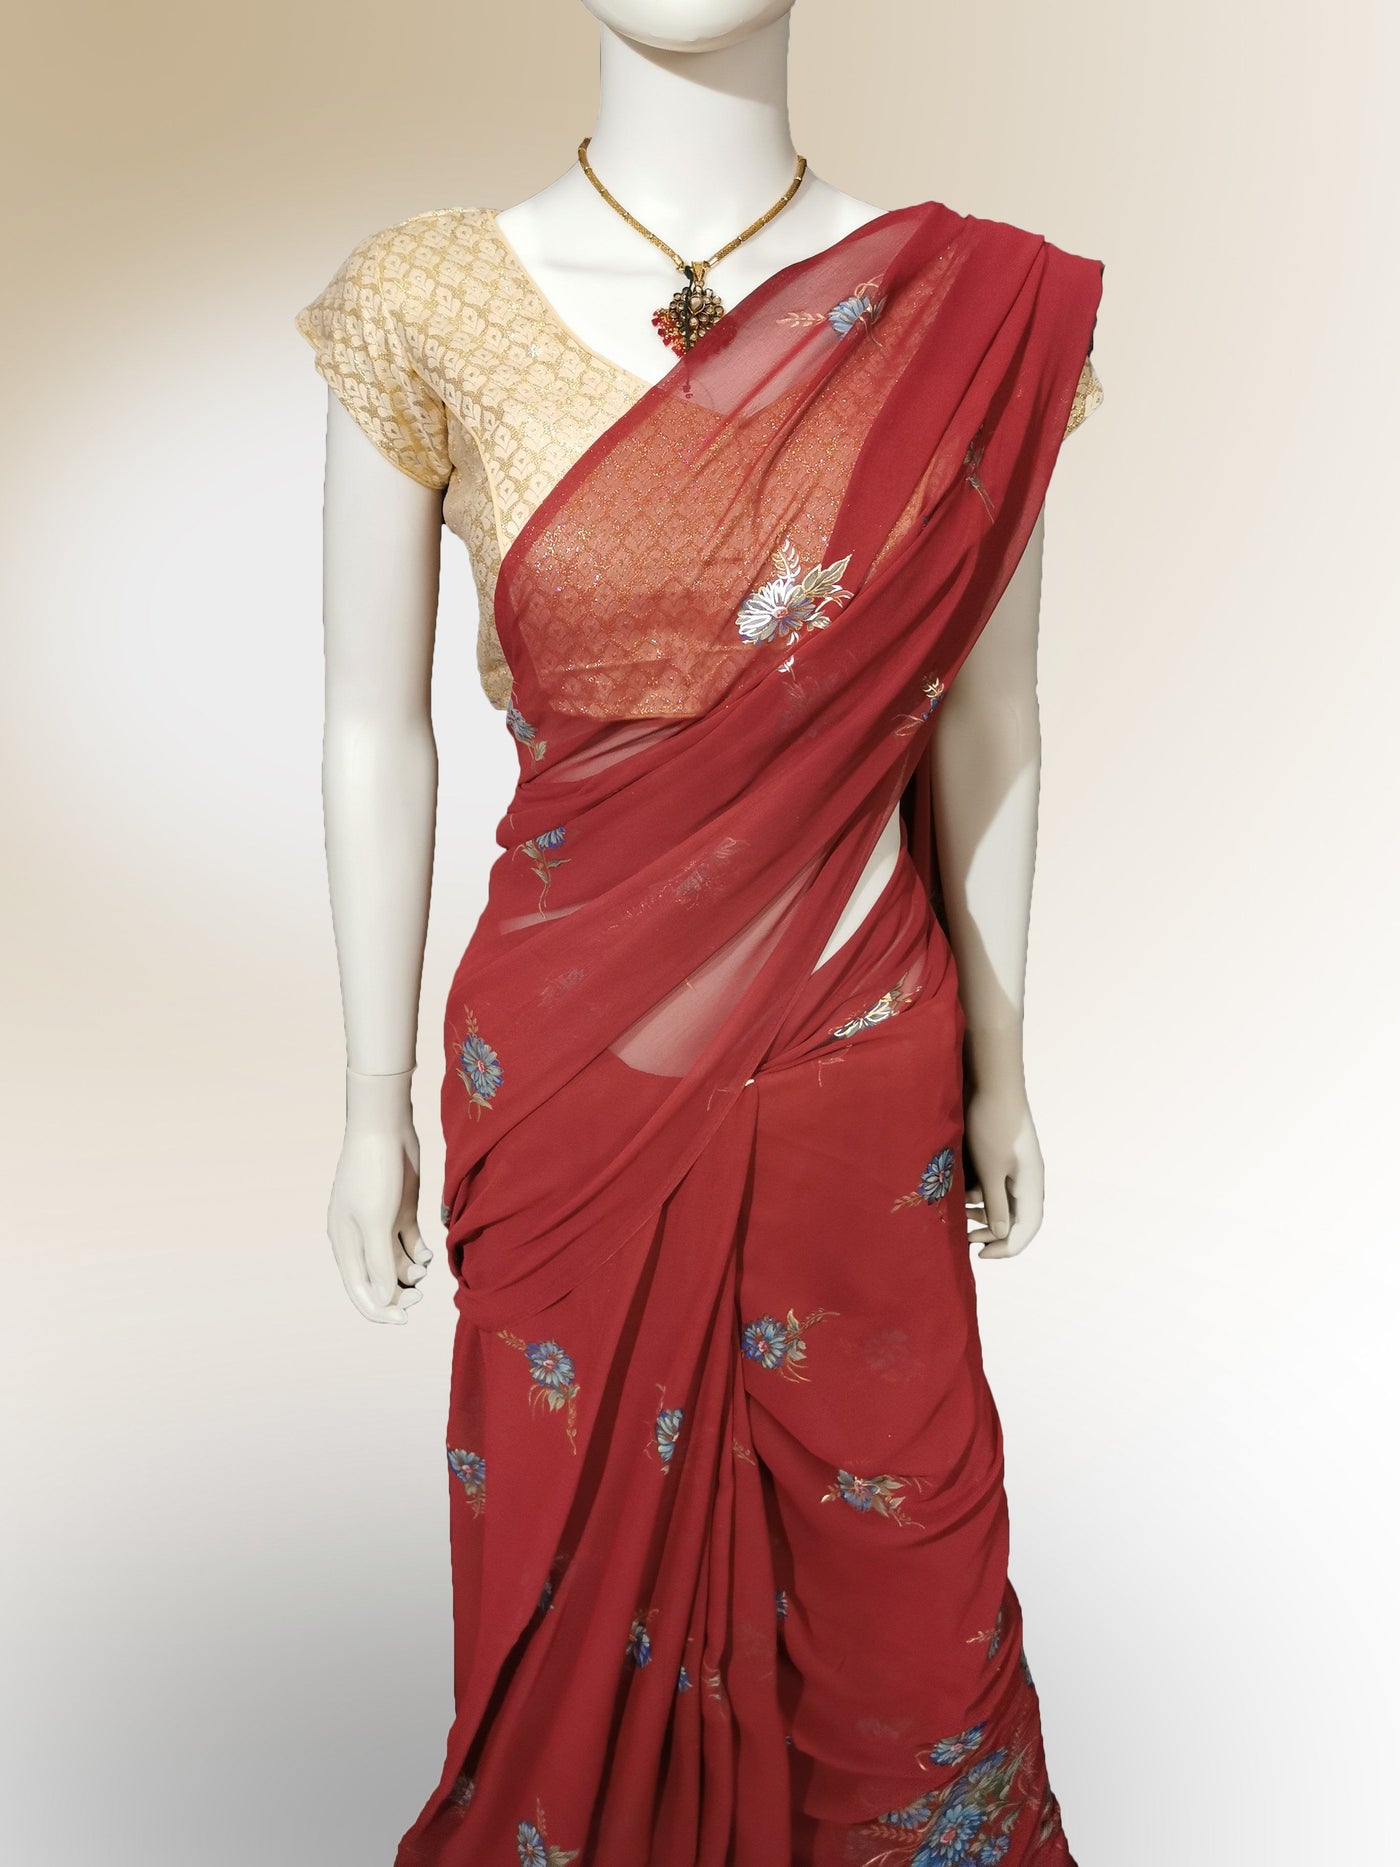 Saree in Tomato Red with Floral Print Indian Clothing in Denver, CO, Aurora, CO, Boulder, CO, Fort Collins, CO, Colorado Springs, CO, Parker, CO, Highlands Ranch, CO, Cherry Creek, CO, Centennial, CO, and Longmont, CO. NATIONWIDE SHIPPING USA- India Fashion X